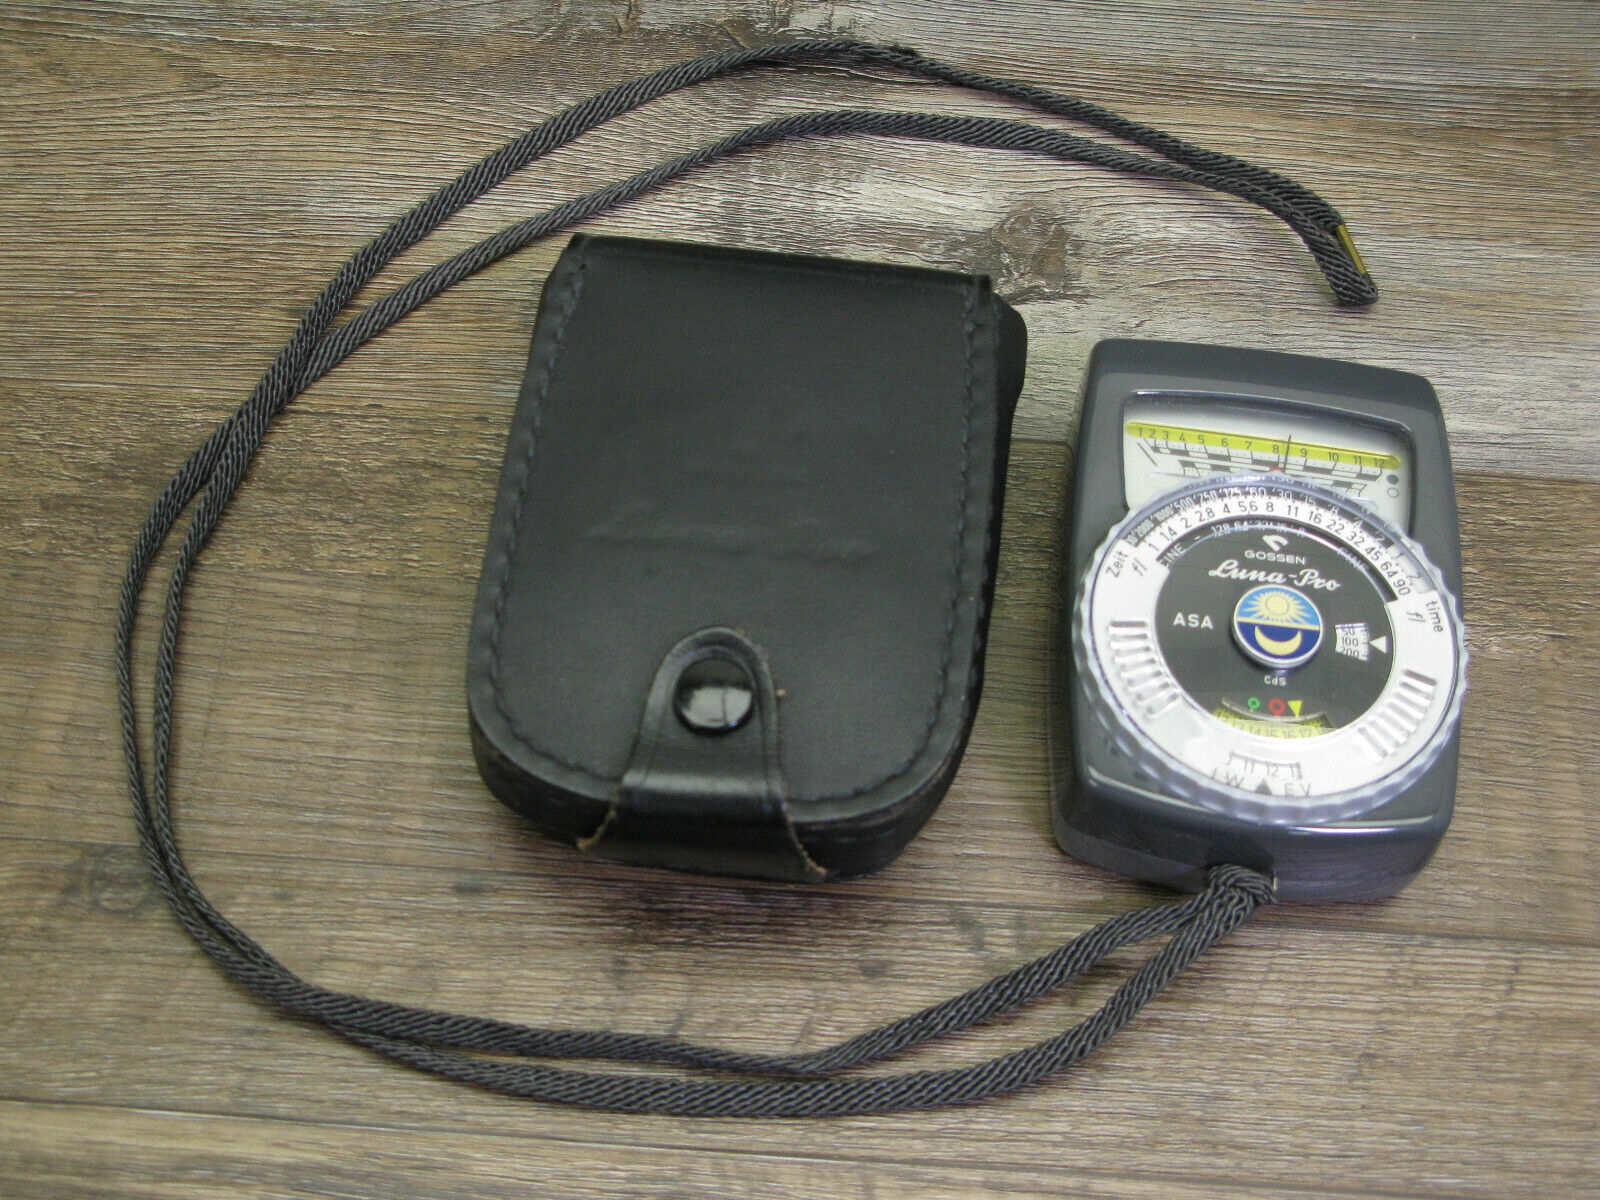 Gossen Luna Pro Light Meter in Case MINT! Tested and Working